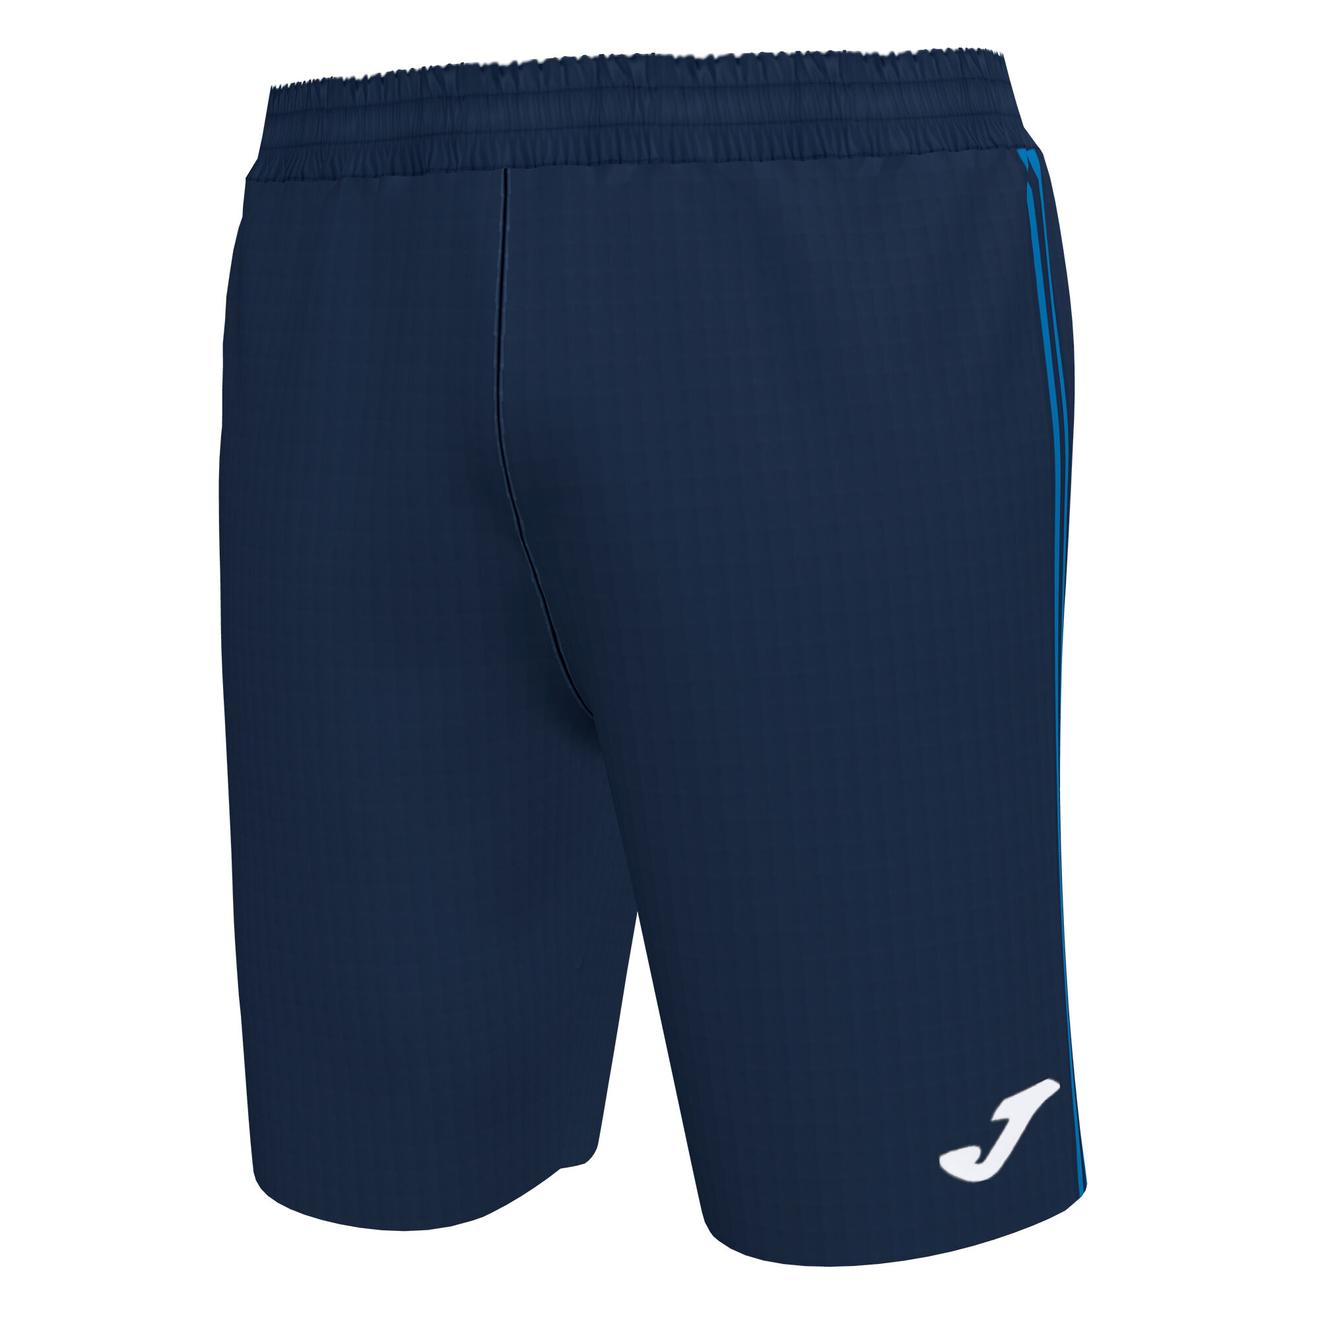 Bermuda shorts man Classic navy blue royal blue offers at £8.74 in Joma